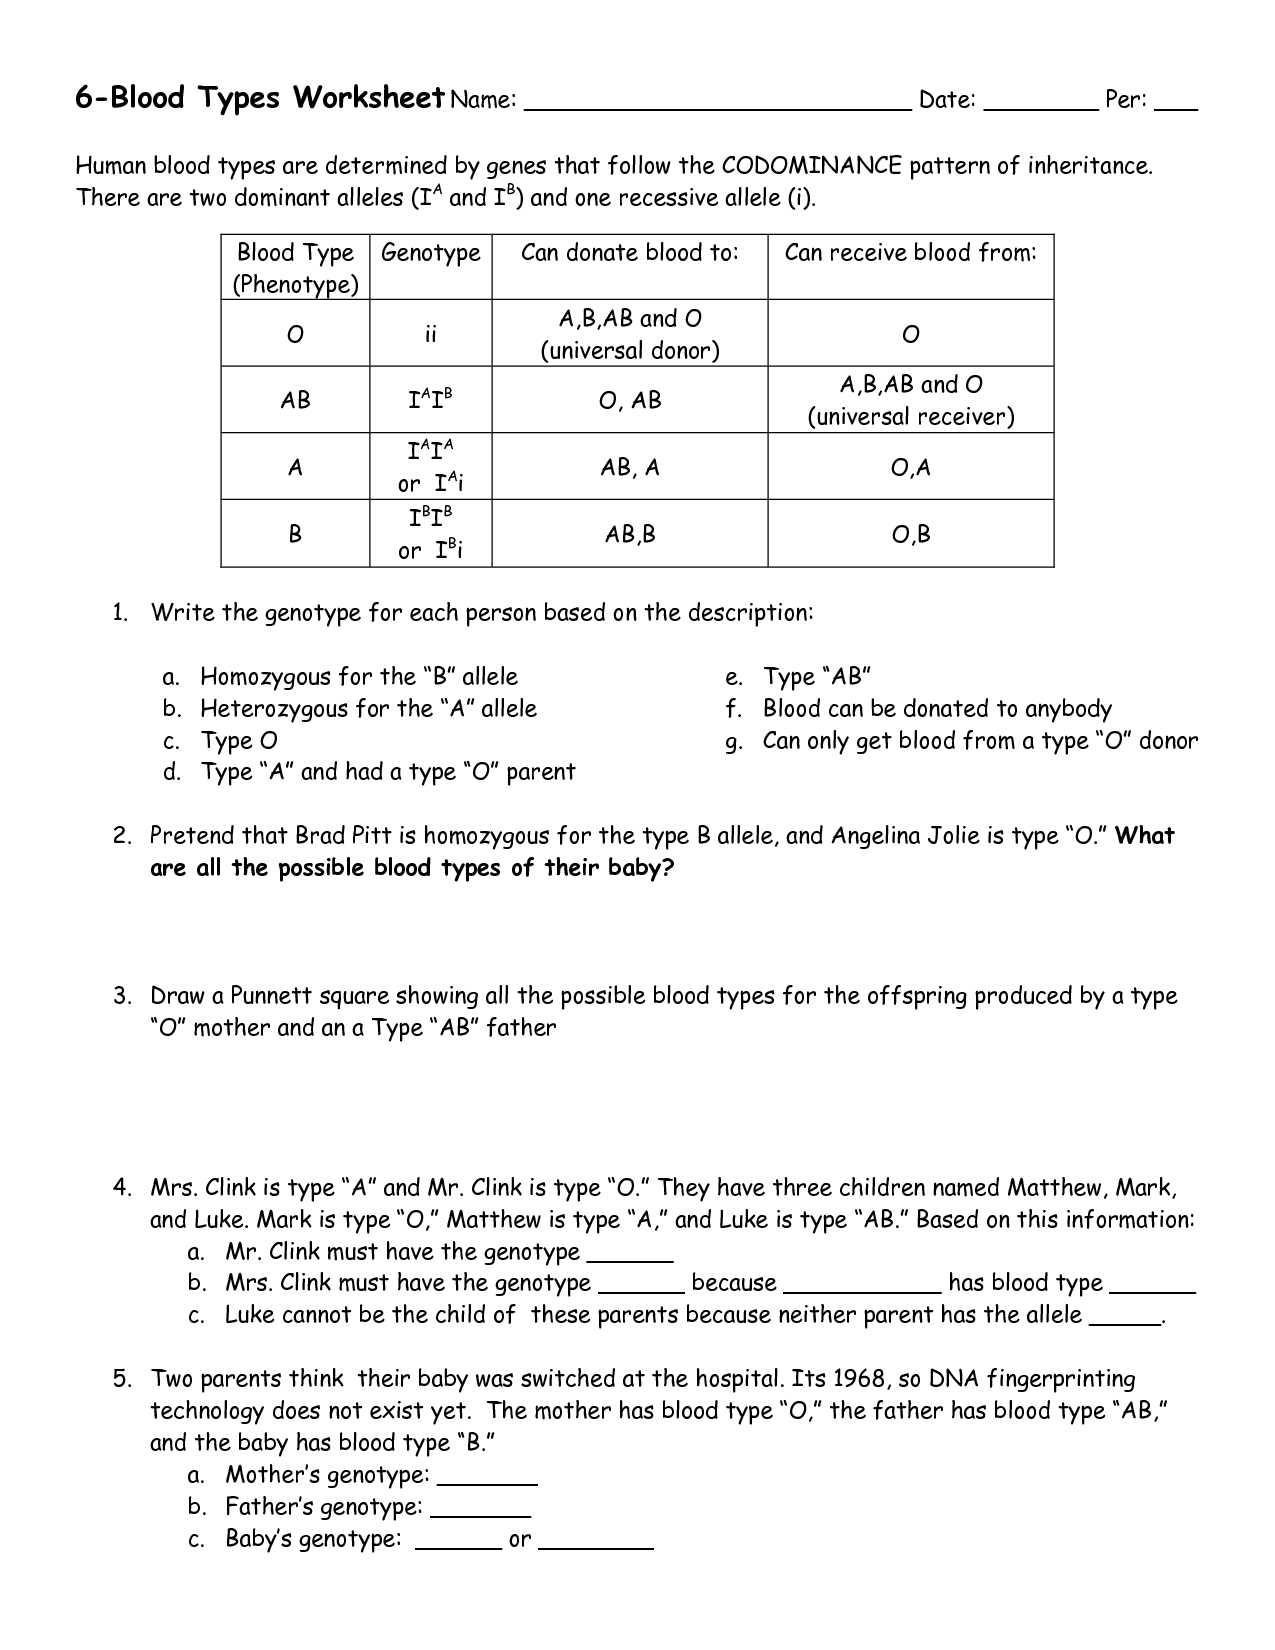 Virus and Bacteria Worksheet Answer Key as Well as Erfreut Anatomy and Physiology Chapter 10 Blood Worksheet Answers